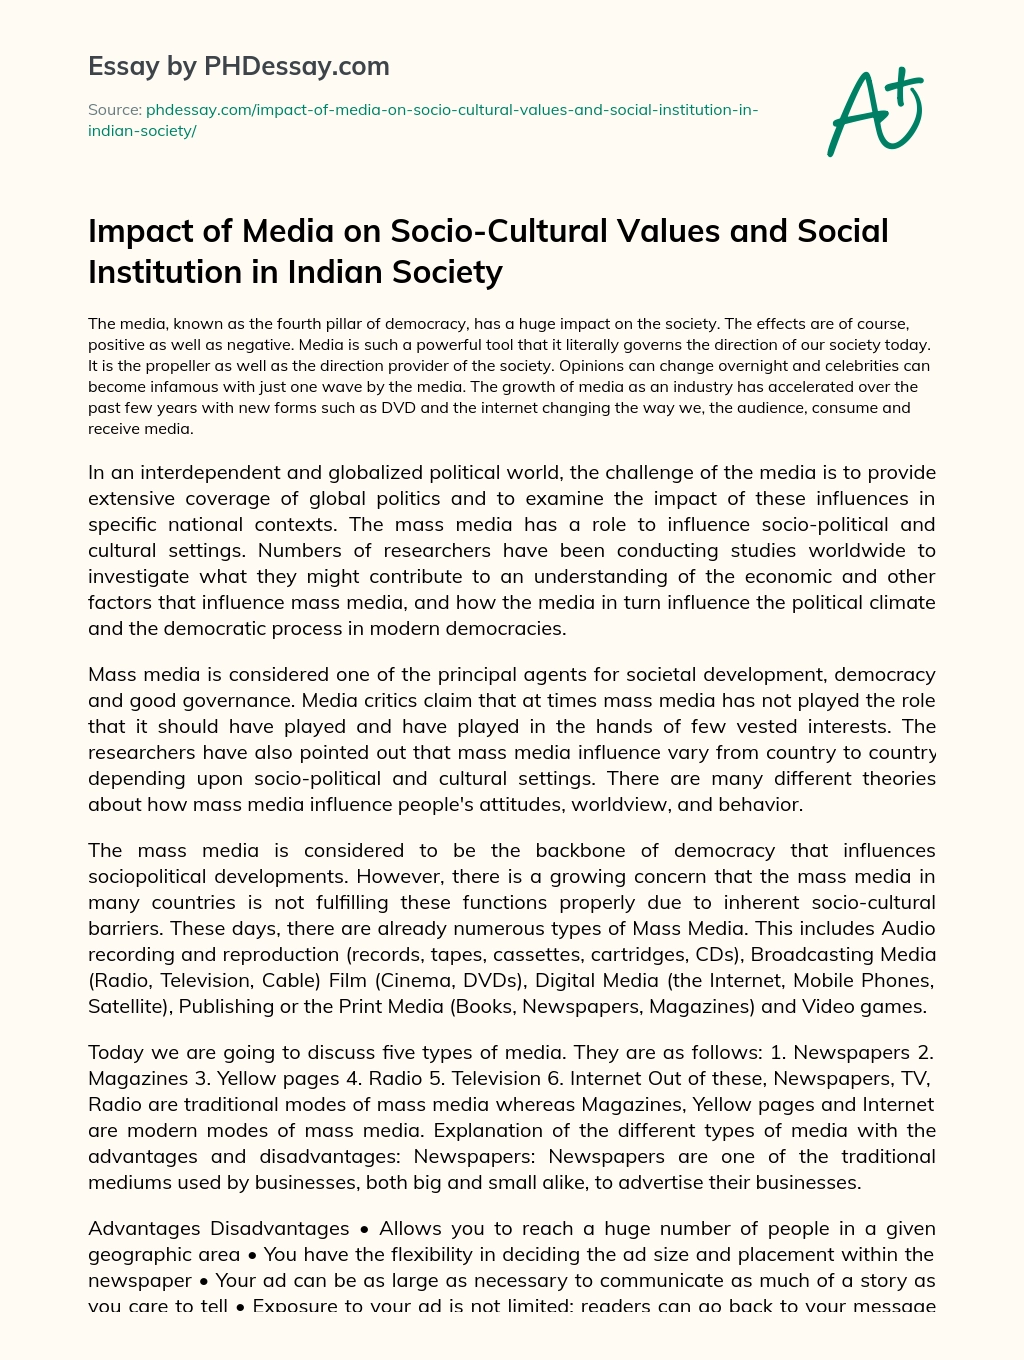 Impact of Media on Socio-Cultural Values and Social Institution in Indian Society essay